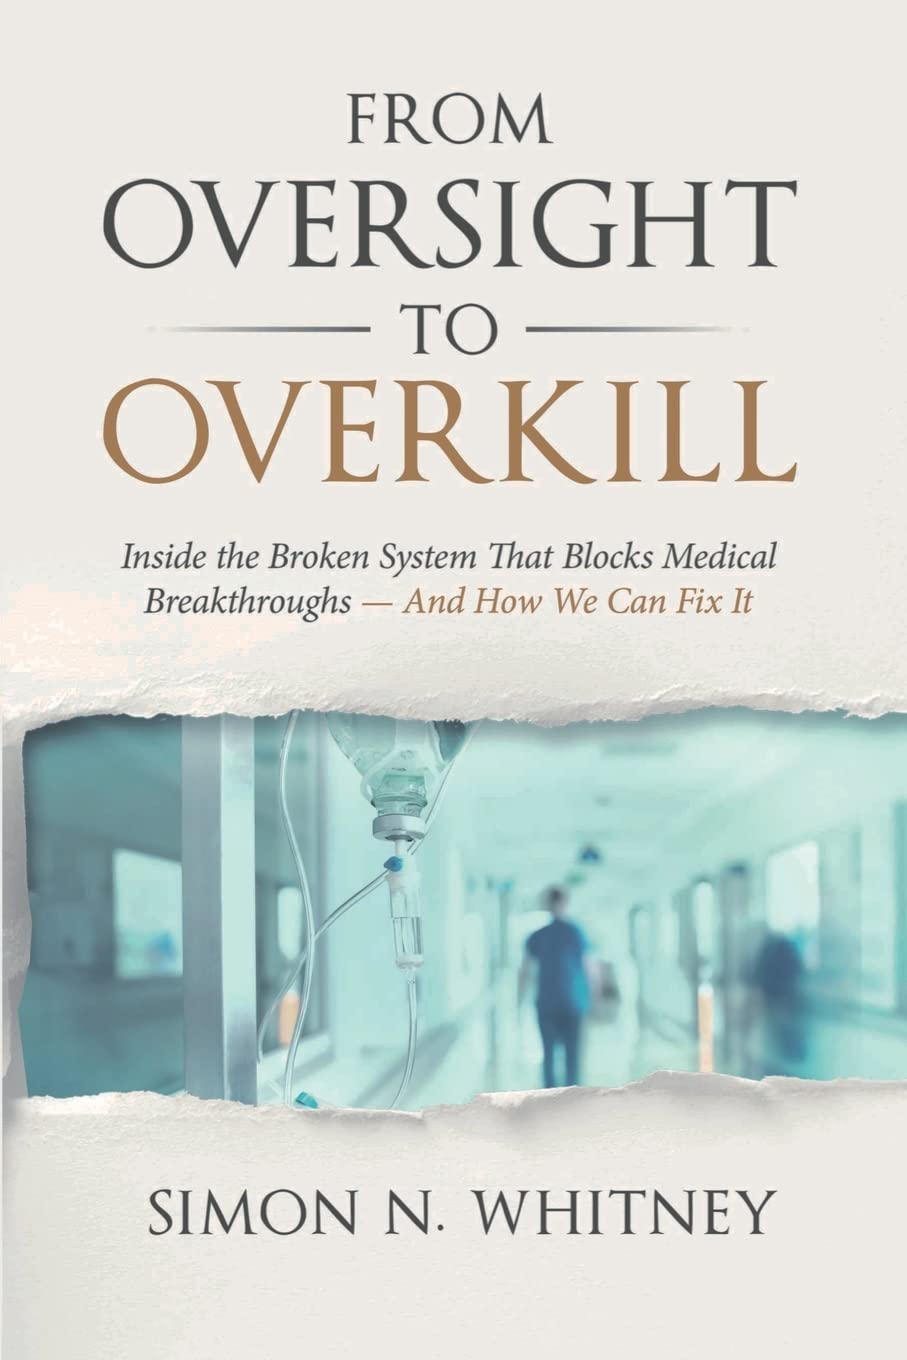 From Oversight to Overkill: Inside the Broken System That Blocks Medical Breakthroughs—And How We Can Fix It